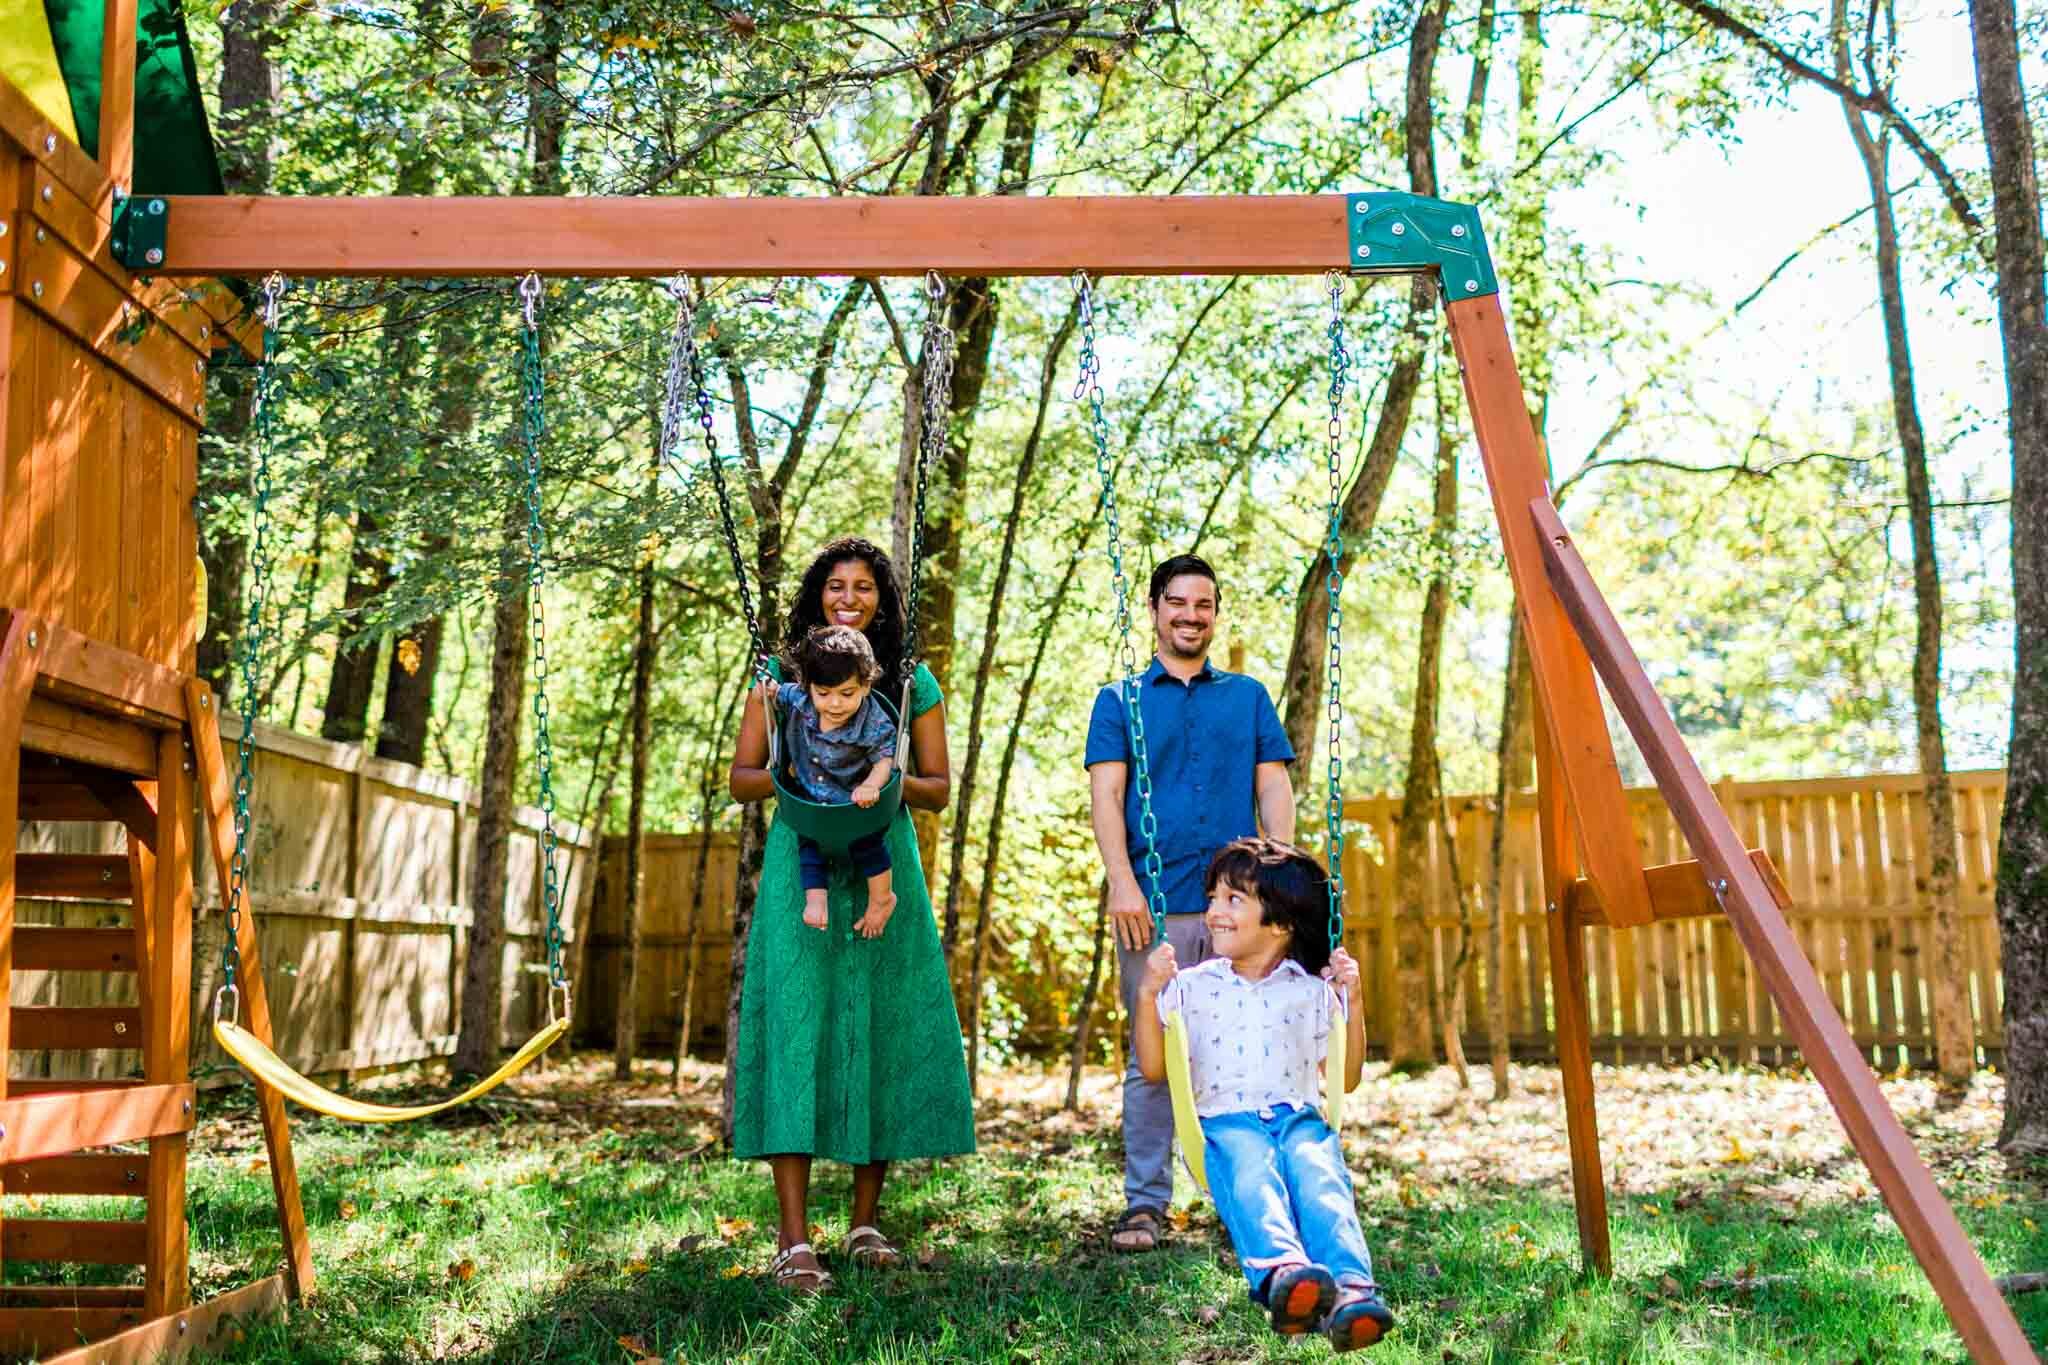 Durham Family Photographer | By G. Lin Photography | Parents pushing kids on swings